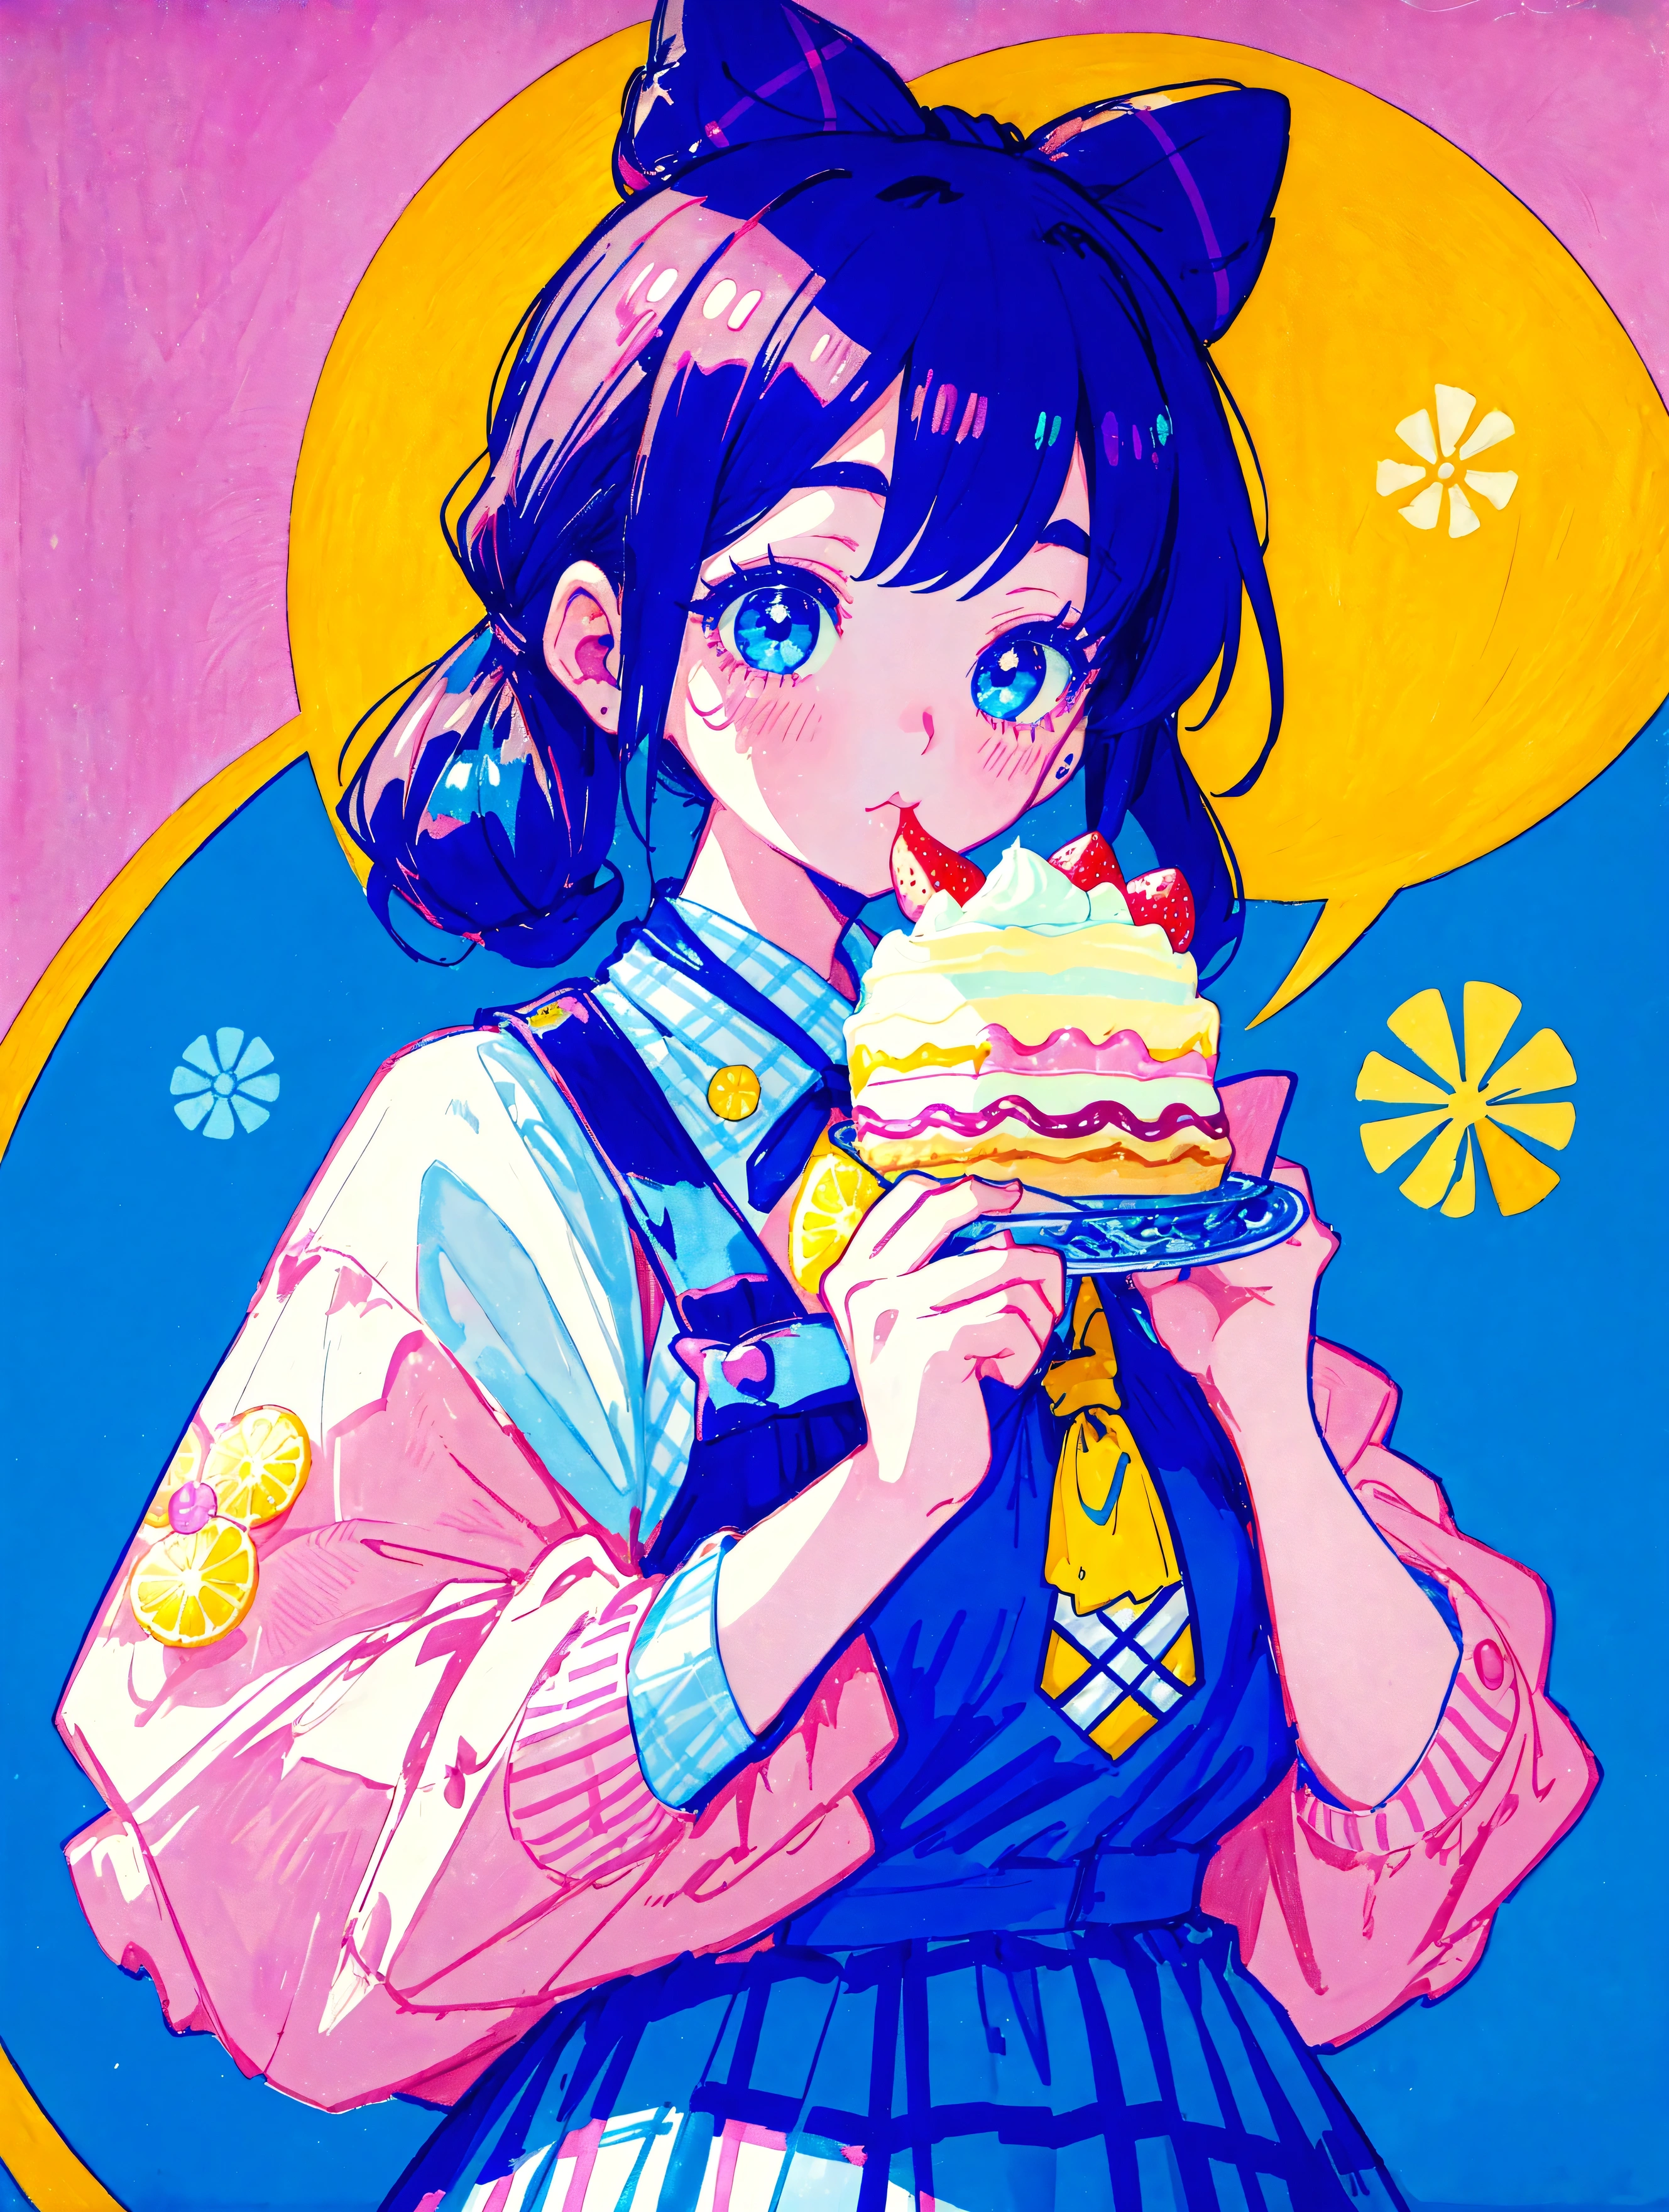 A cute girl，Anime art style，Head close-up，Big eyes with long eyelashes，Hair tied at the back，The big bow is decorated with colorful plaid，She eats a fruit pie at a vintage dessert shop with a retro neon sign，Surrounded by colorful desserts poster。She has blue eyes and fair skin.。She was wearing a blue and white plaid suspender skirt，A bow is tied around the neck。Bright colors，Strong contrast，Kawaii punk aesthetic